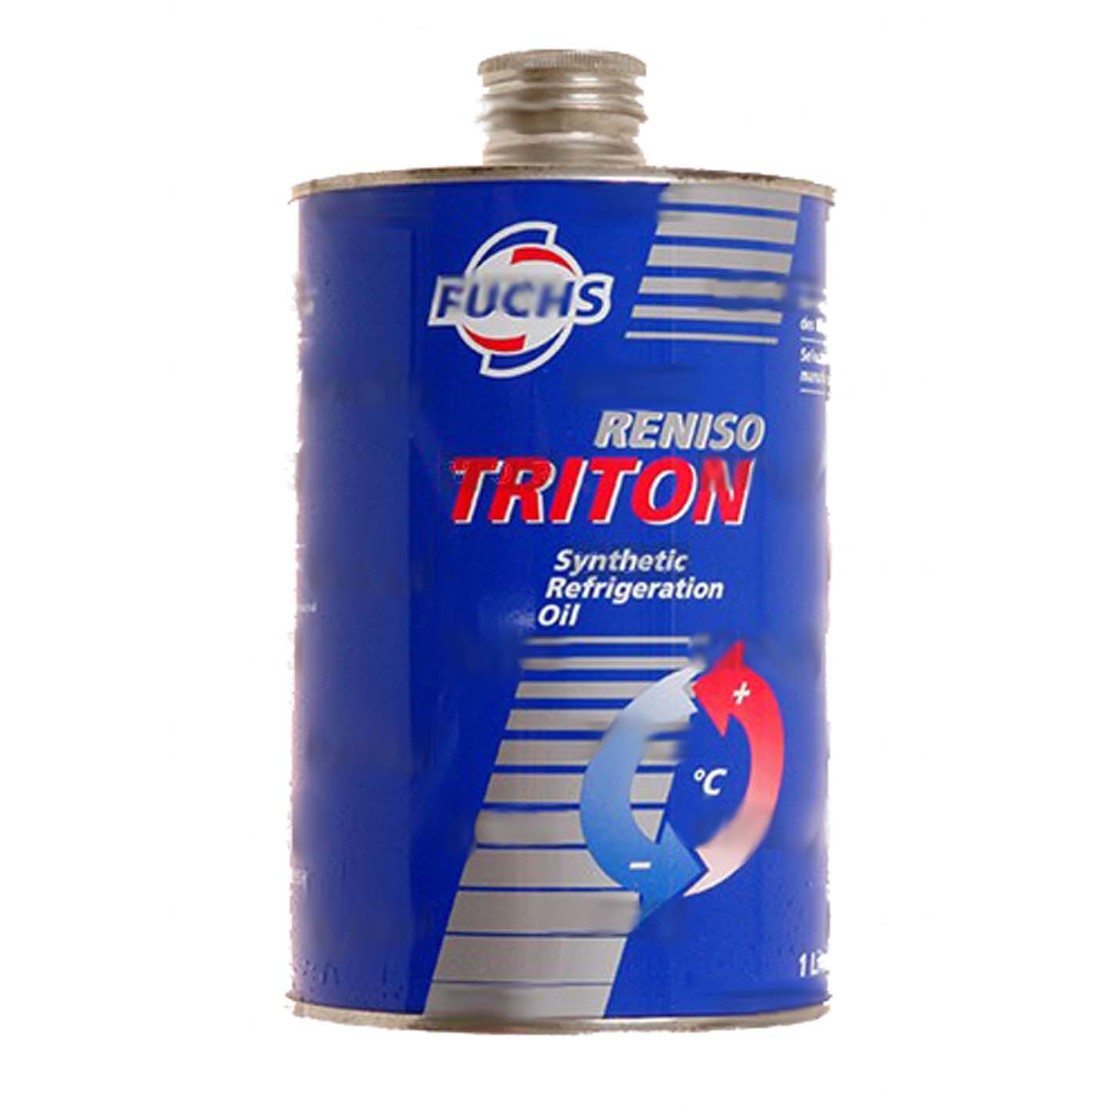 Synthetic oil Fuchs Reniso Triton SEZ32, 1L Automotive parts of refrigerated freezers for domestic industrial refrigeration equipment